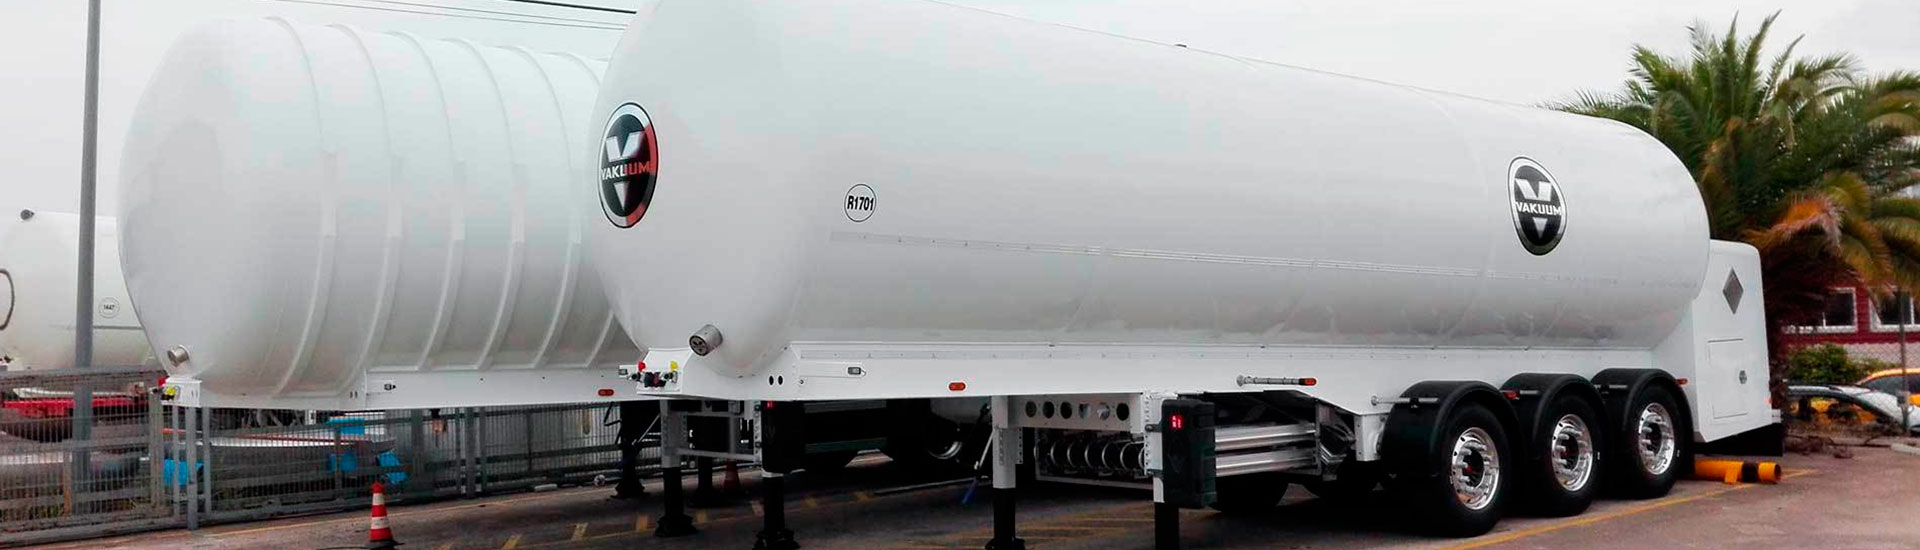 At Vakuum we design and manufacture semi-trailers for the transport of Air Gases LIN - LOX - LAR